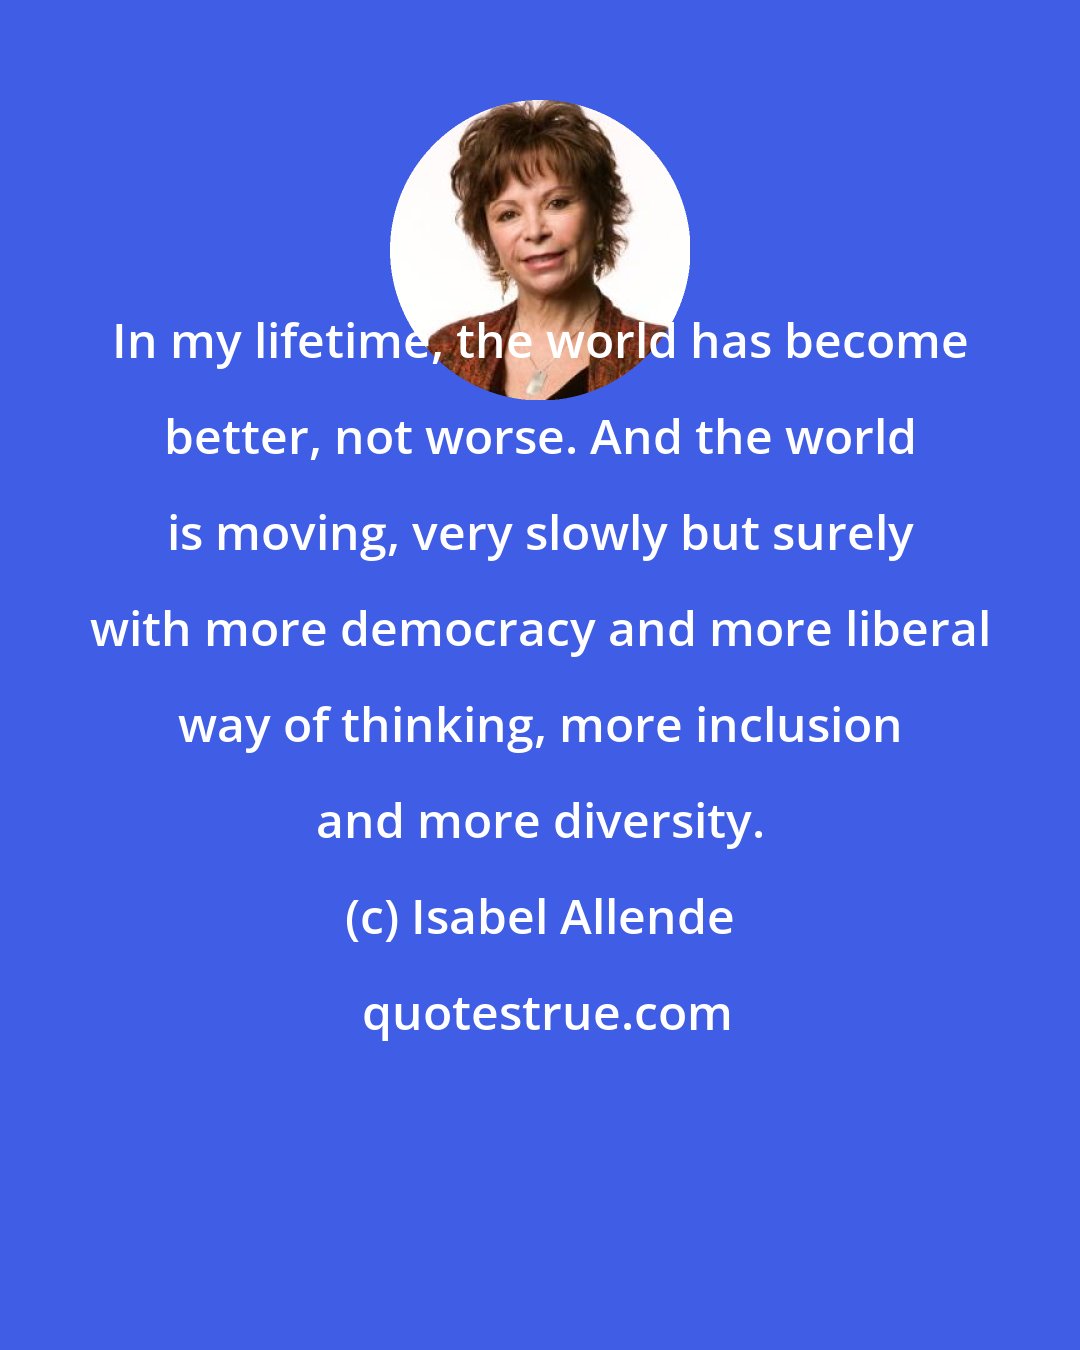 Isabel Allende: In my lifetime, the world has become better, not worse. And the world is moving, very slowly but surely with more democracy and more liberal way of thinking, more inclusion and more diversity.